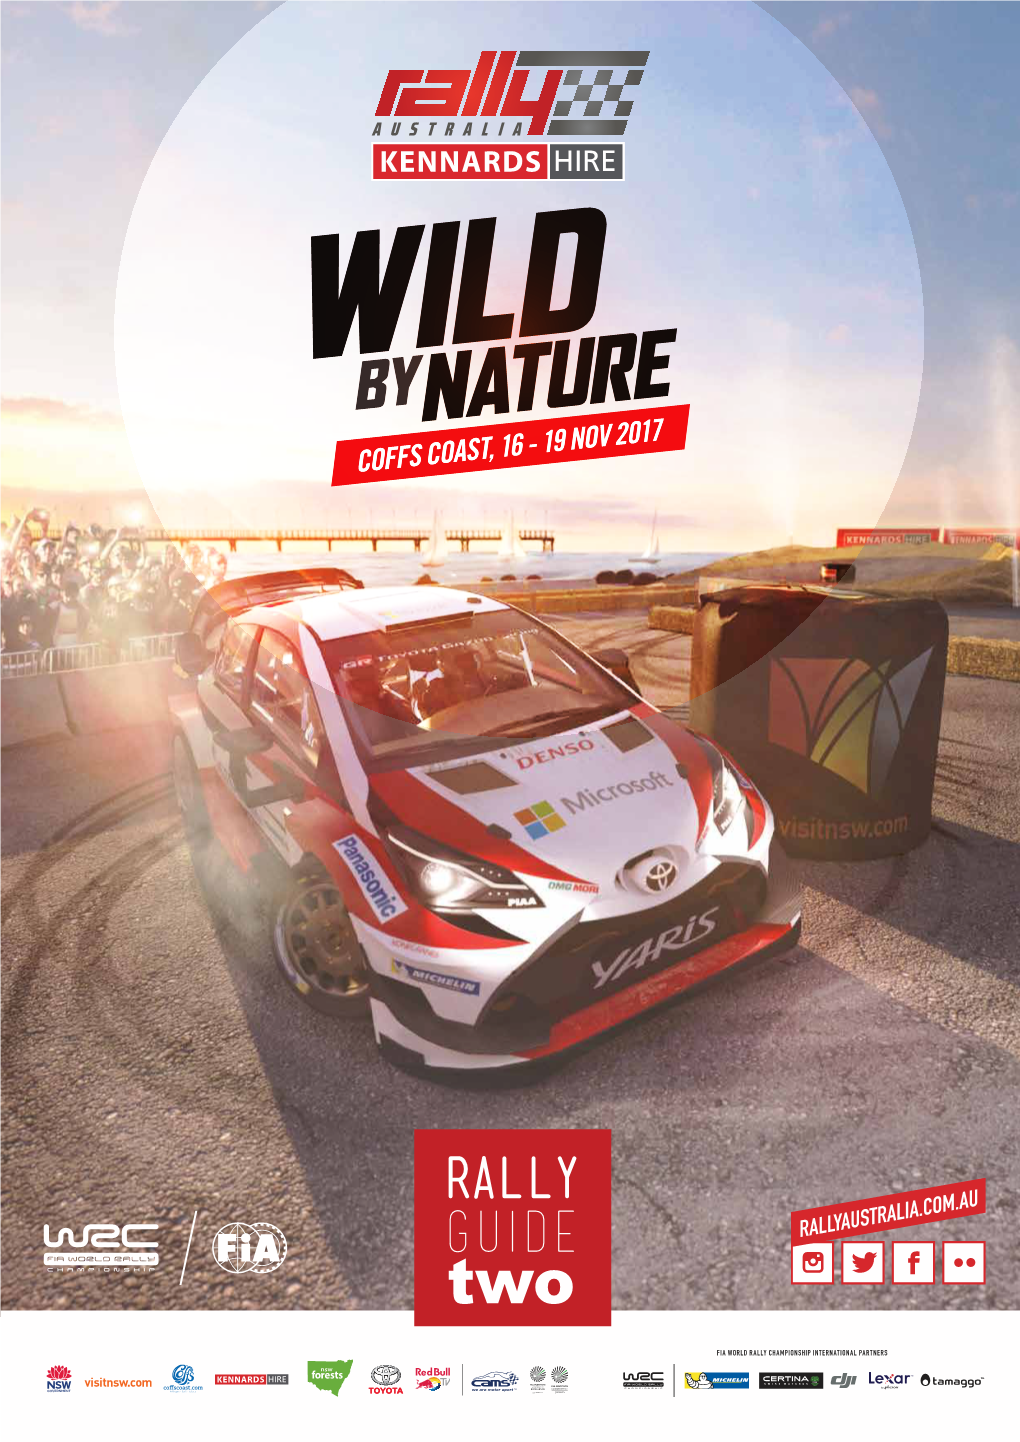 RALLY GUIDE Two